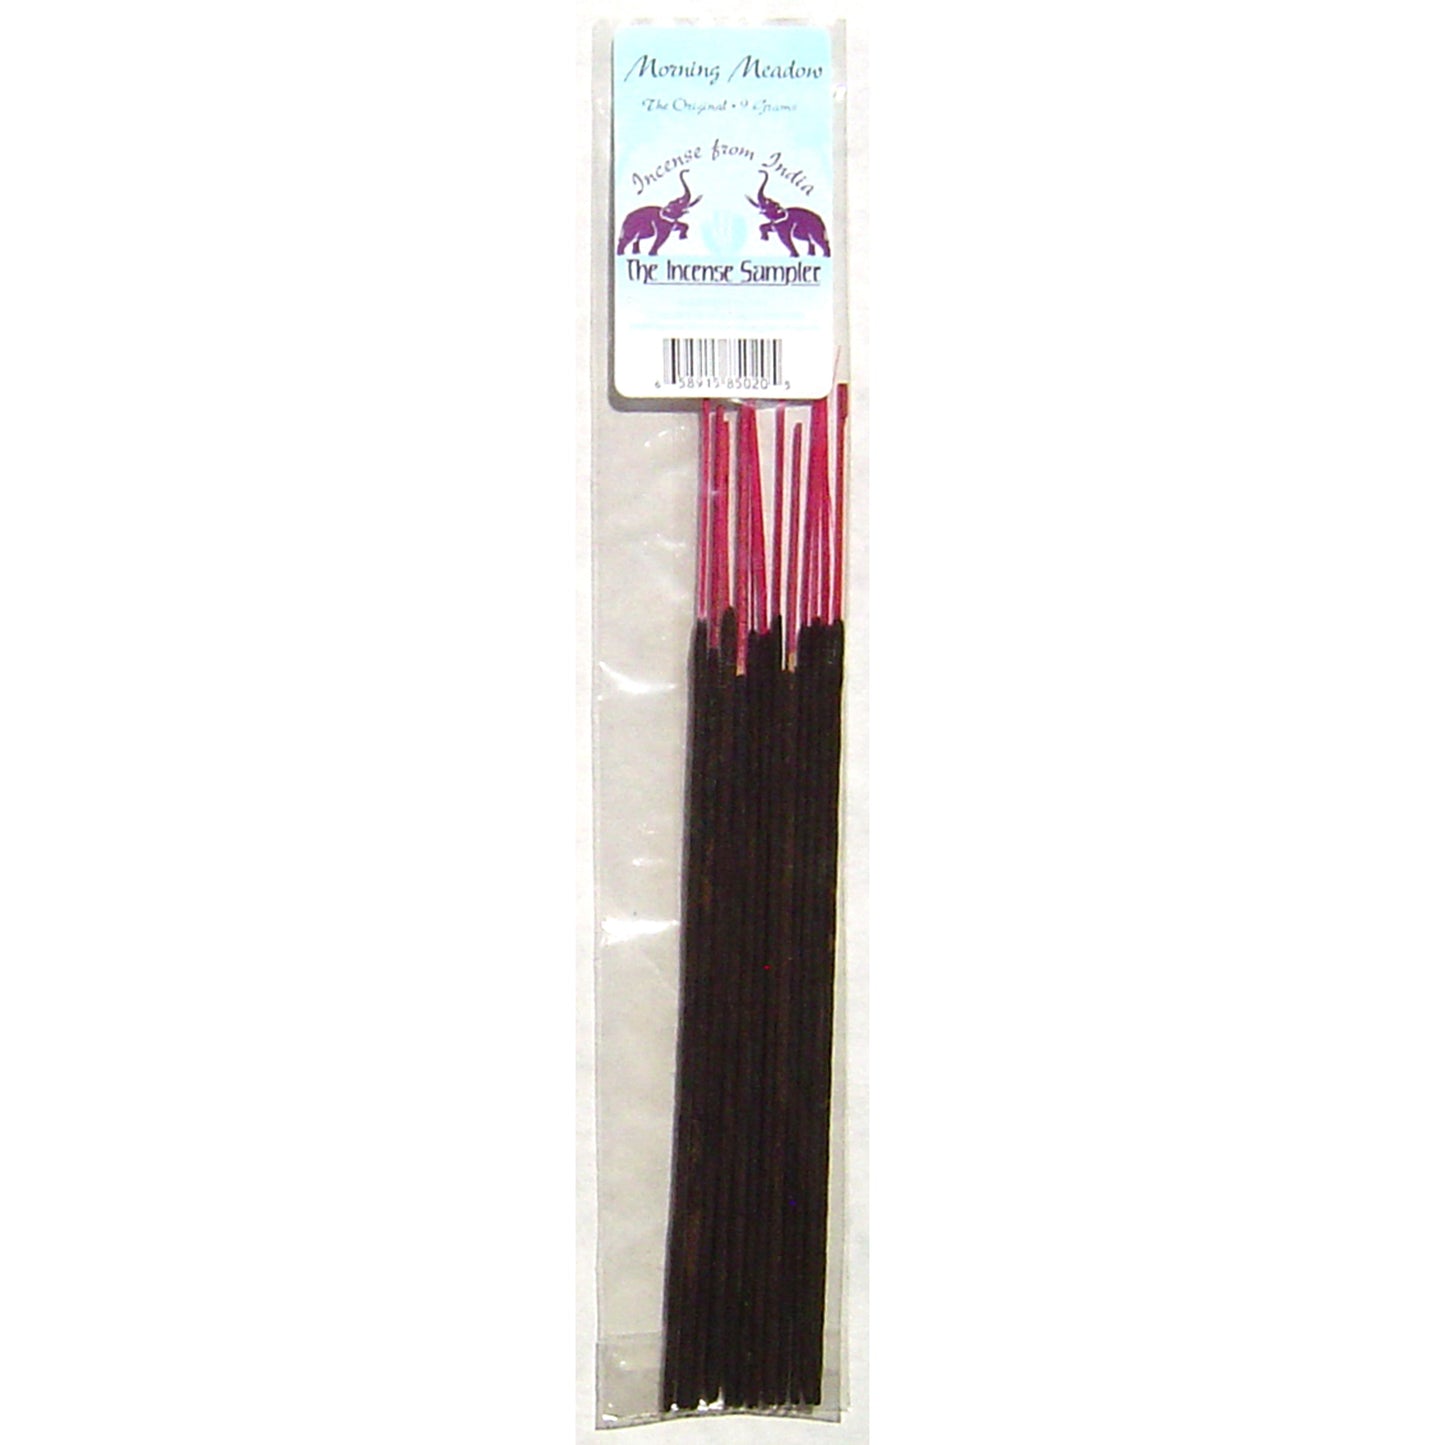 Incense From India - Morning Meadow